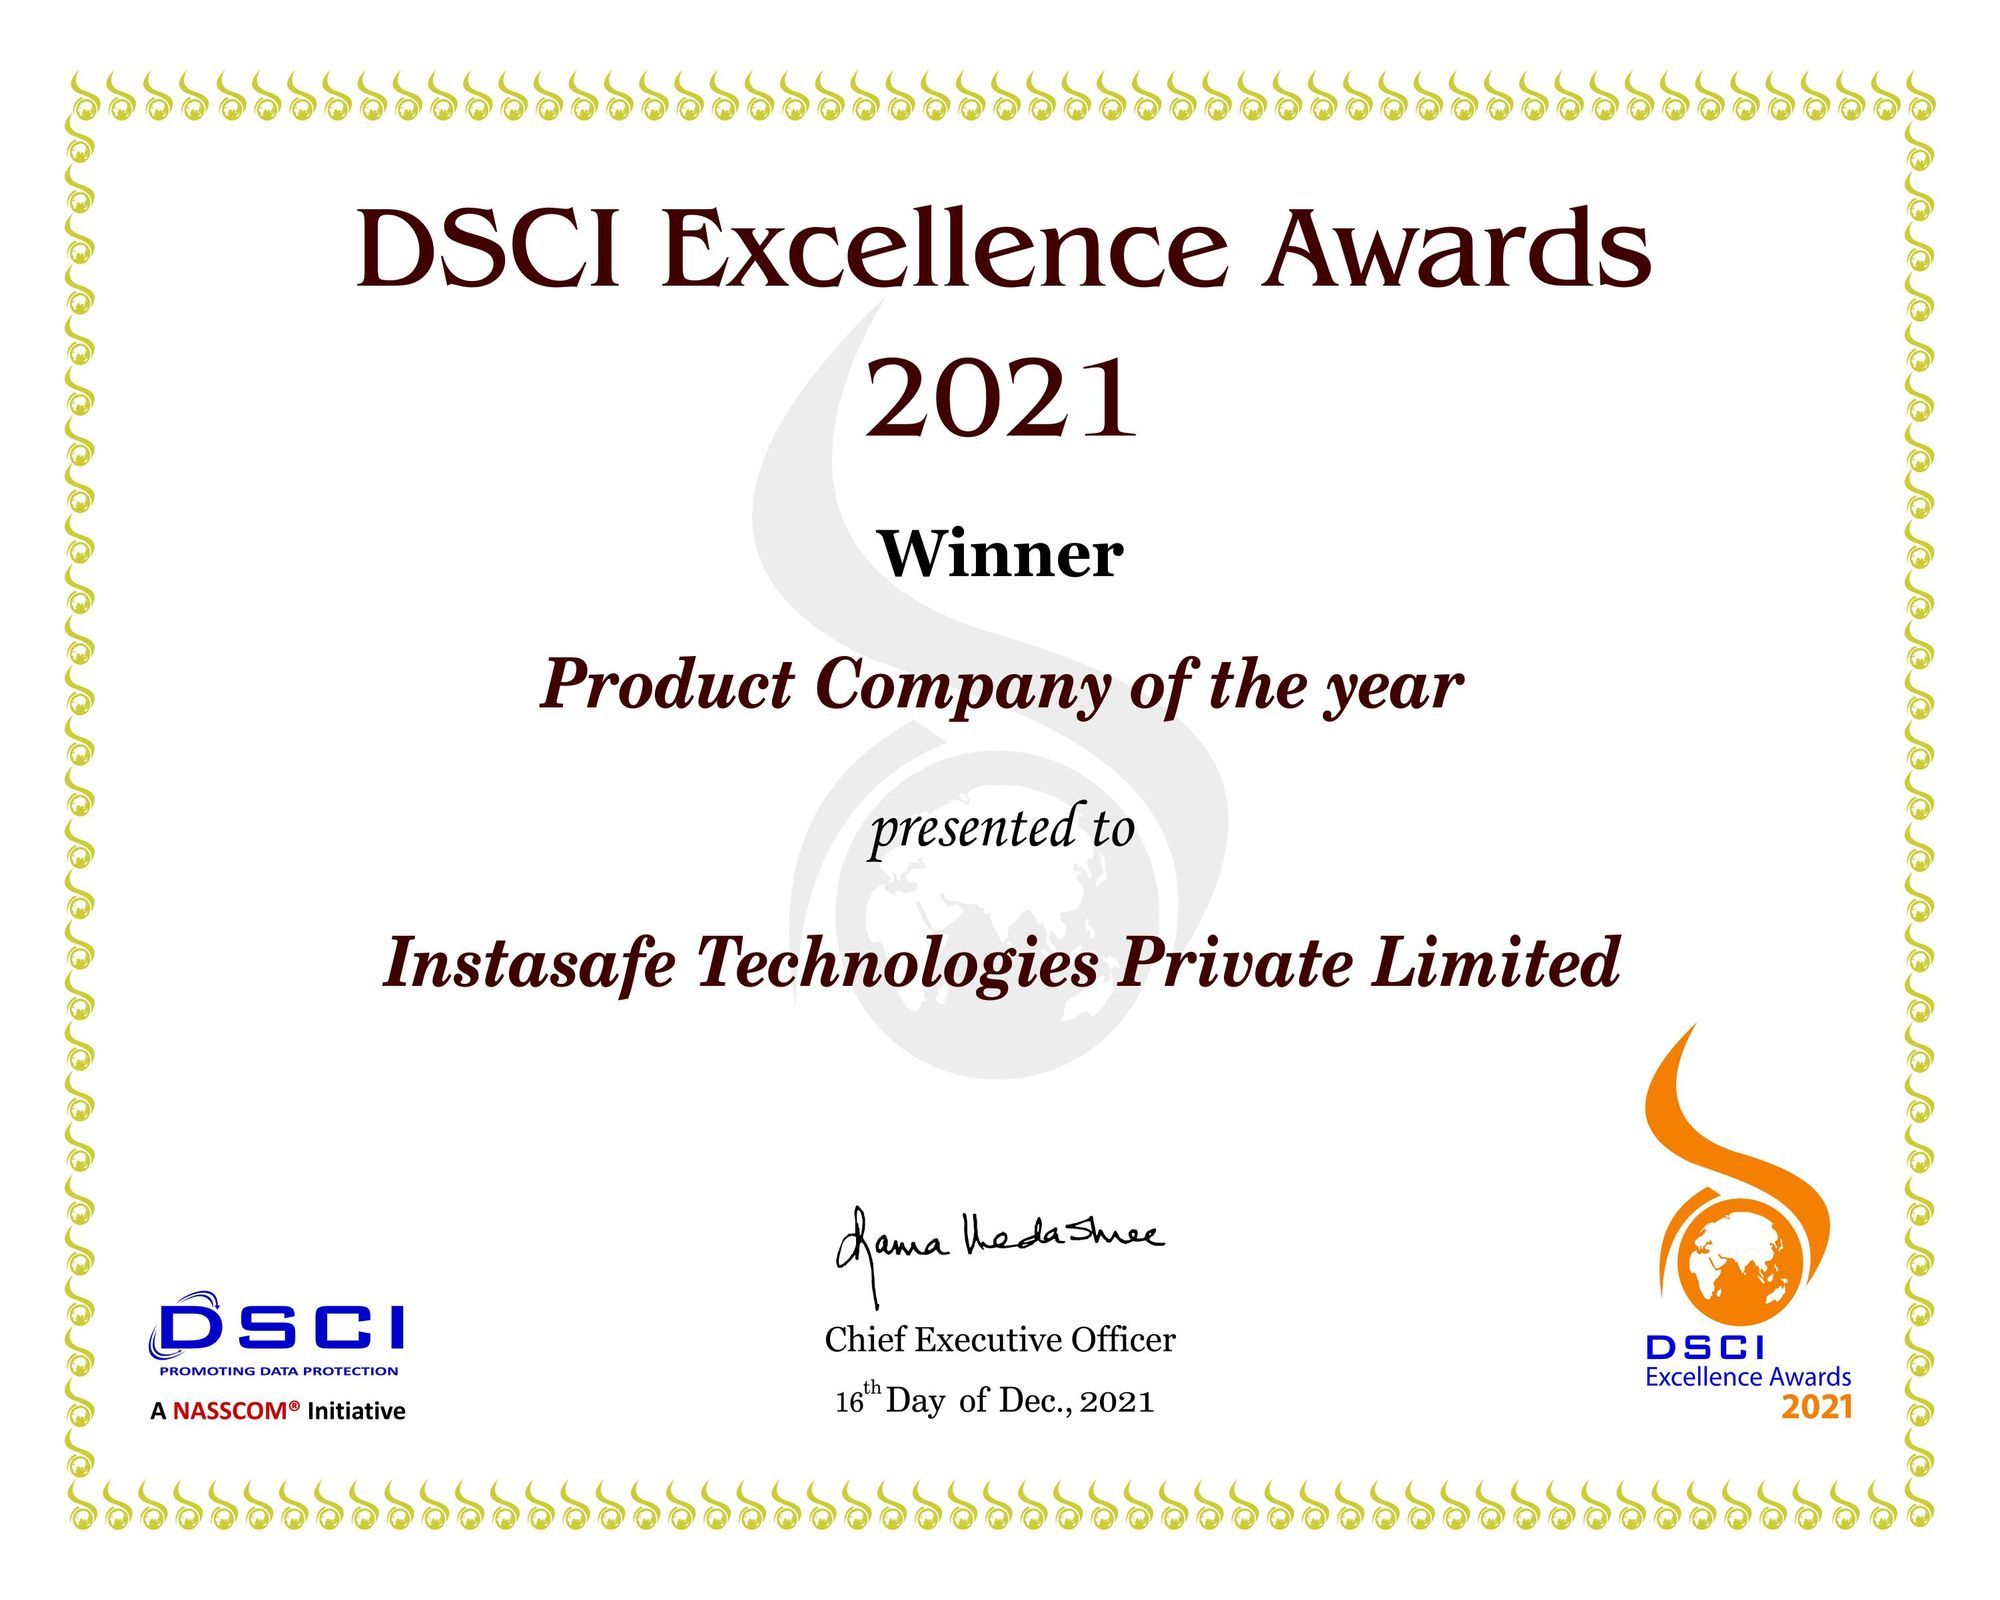 InstaSafe - one of the best zero trust companies wins "Product Company of the Year" in the field of cybersecurity